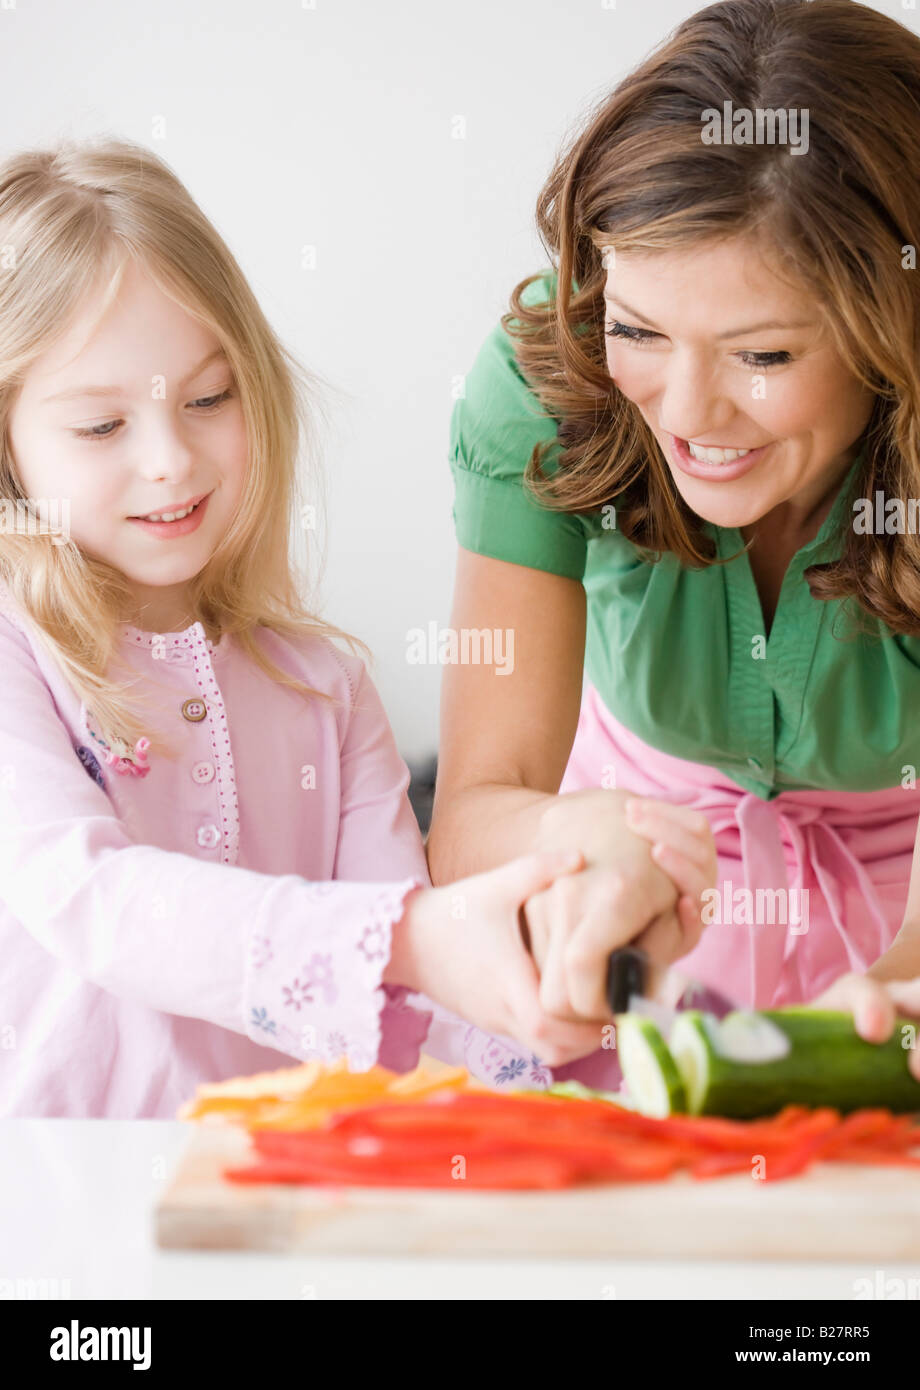 Mother helping daughter chop vegetables Stock Photo